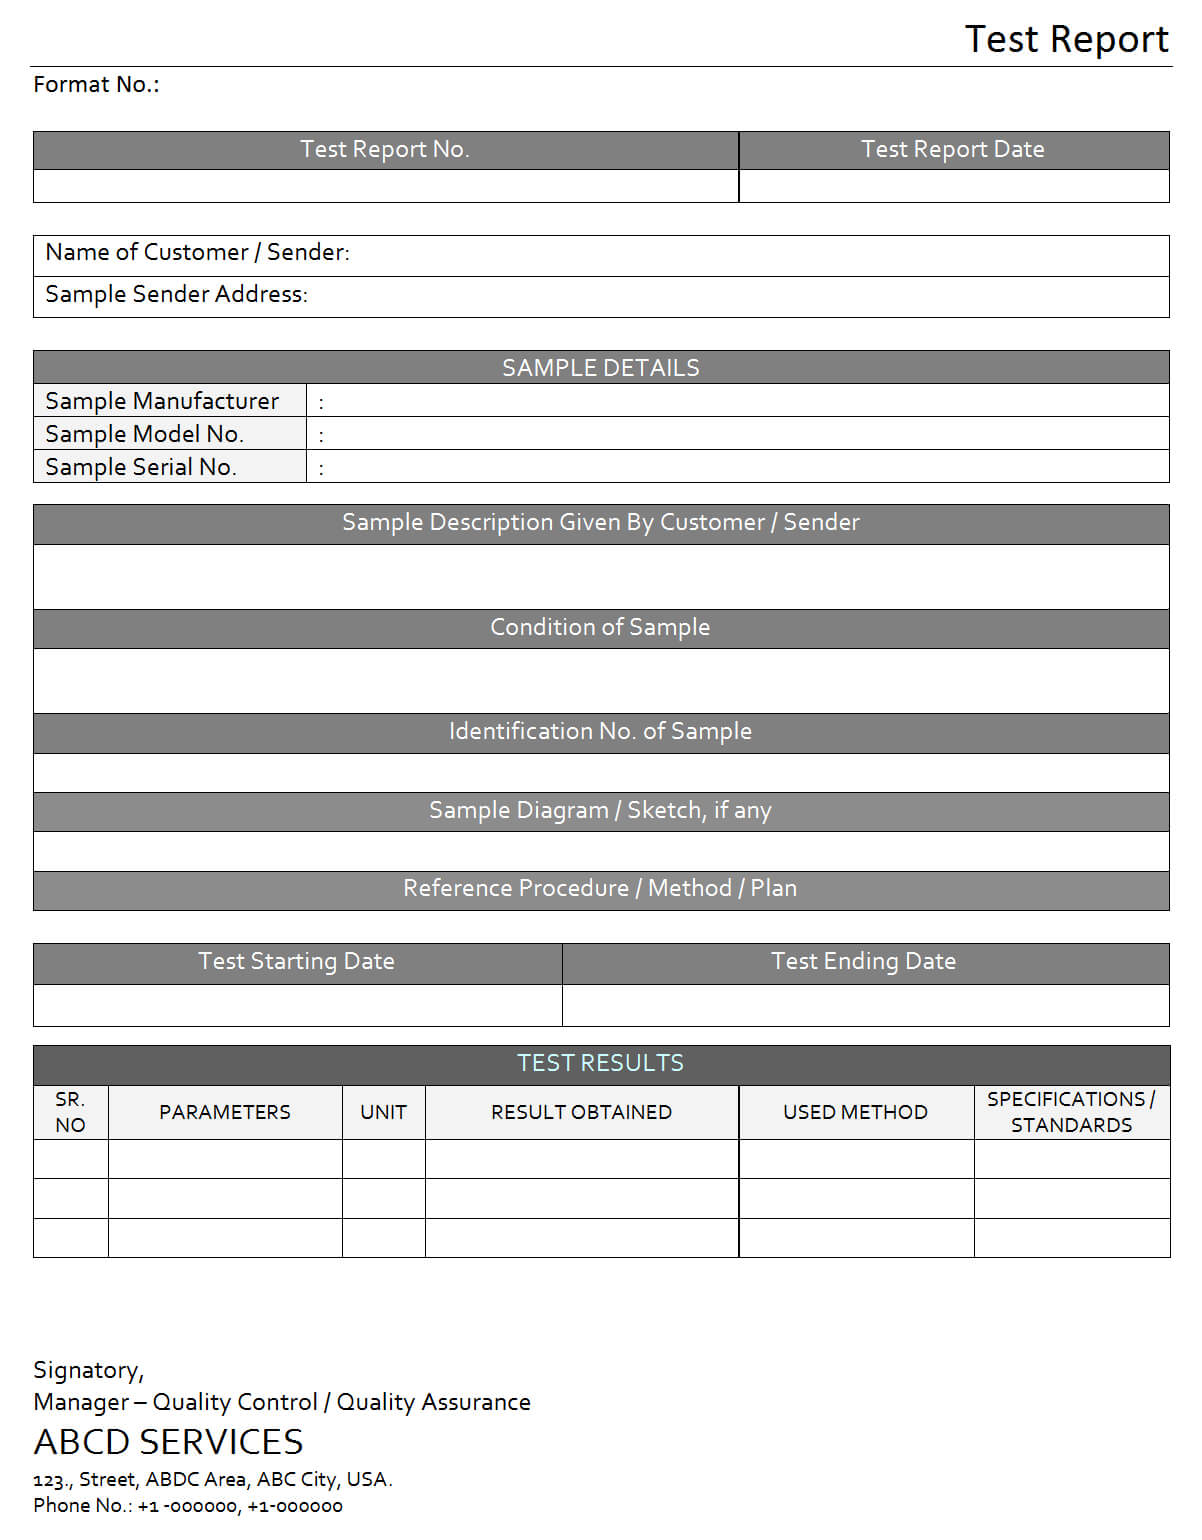 Test Report For Laboratory – For Test Result Report Template